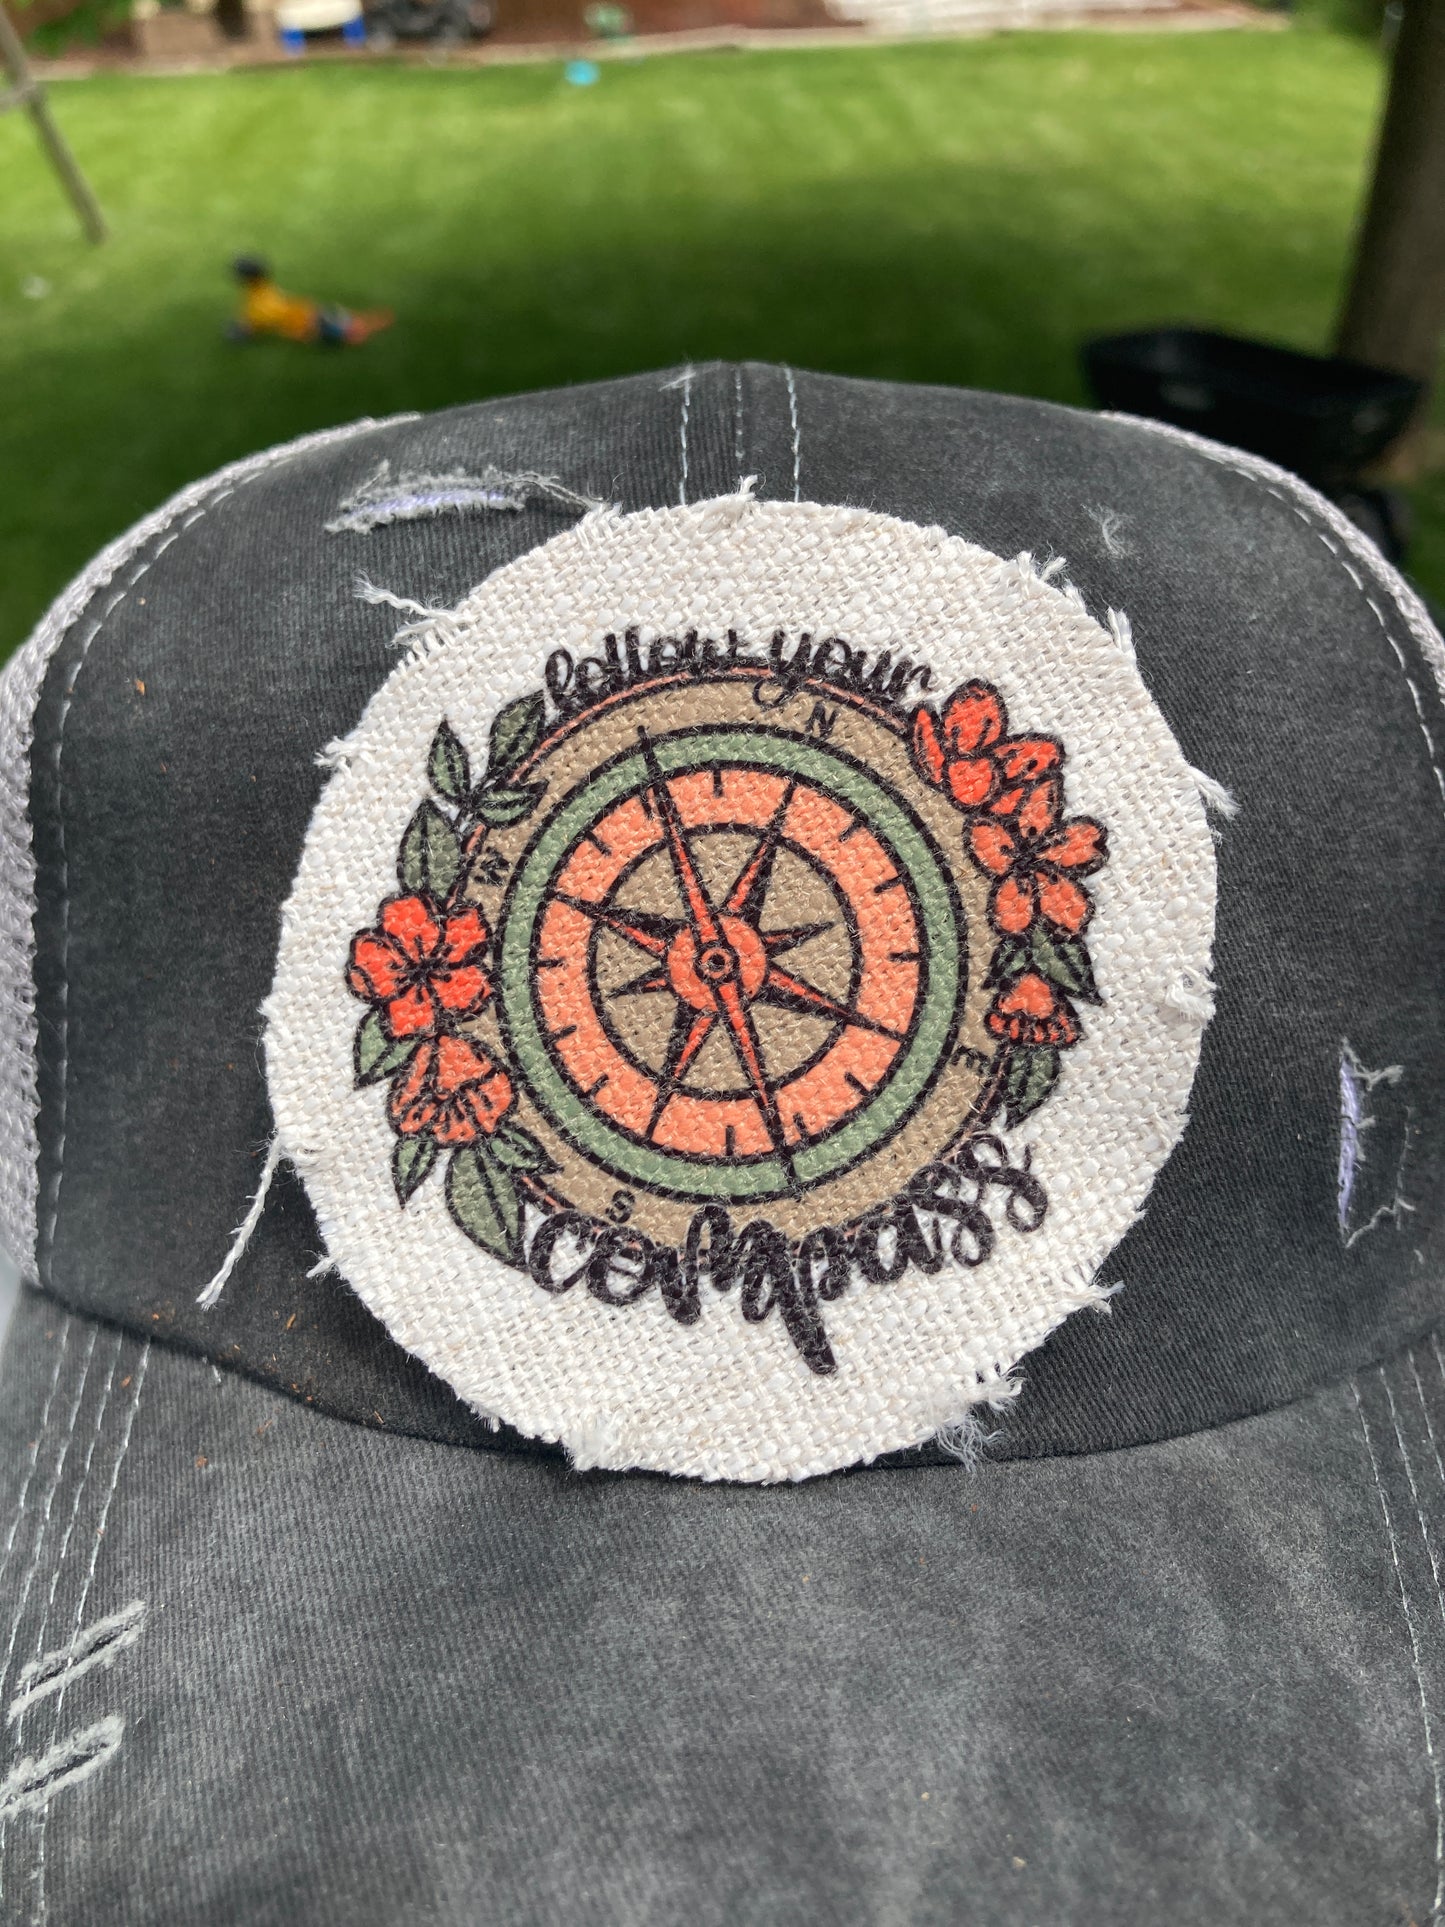 Follow Your Compass Hat Patch